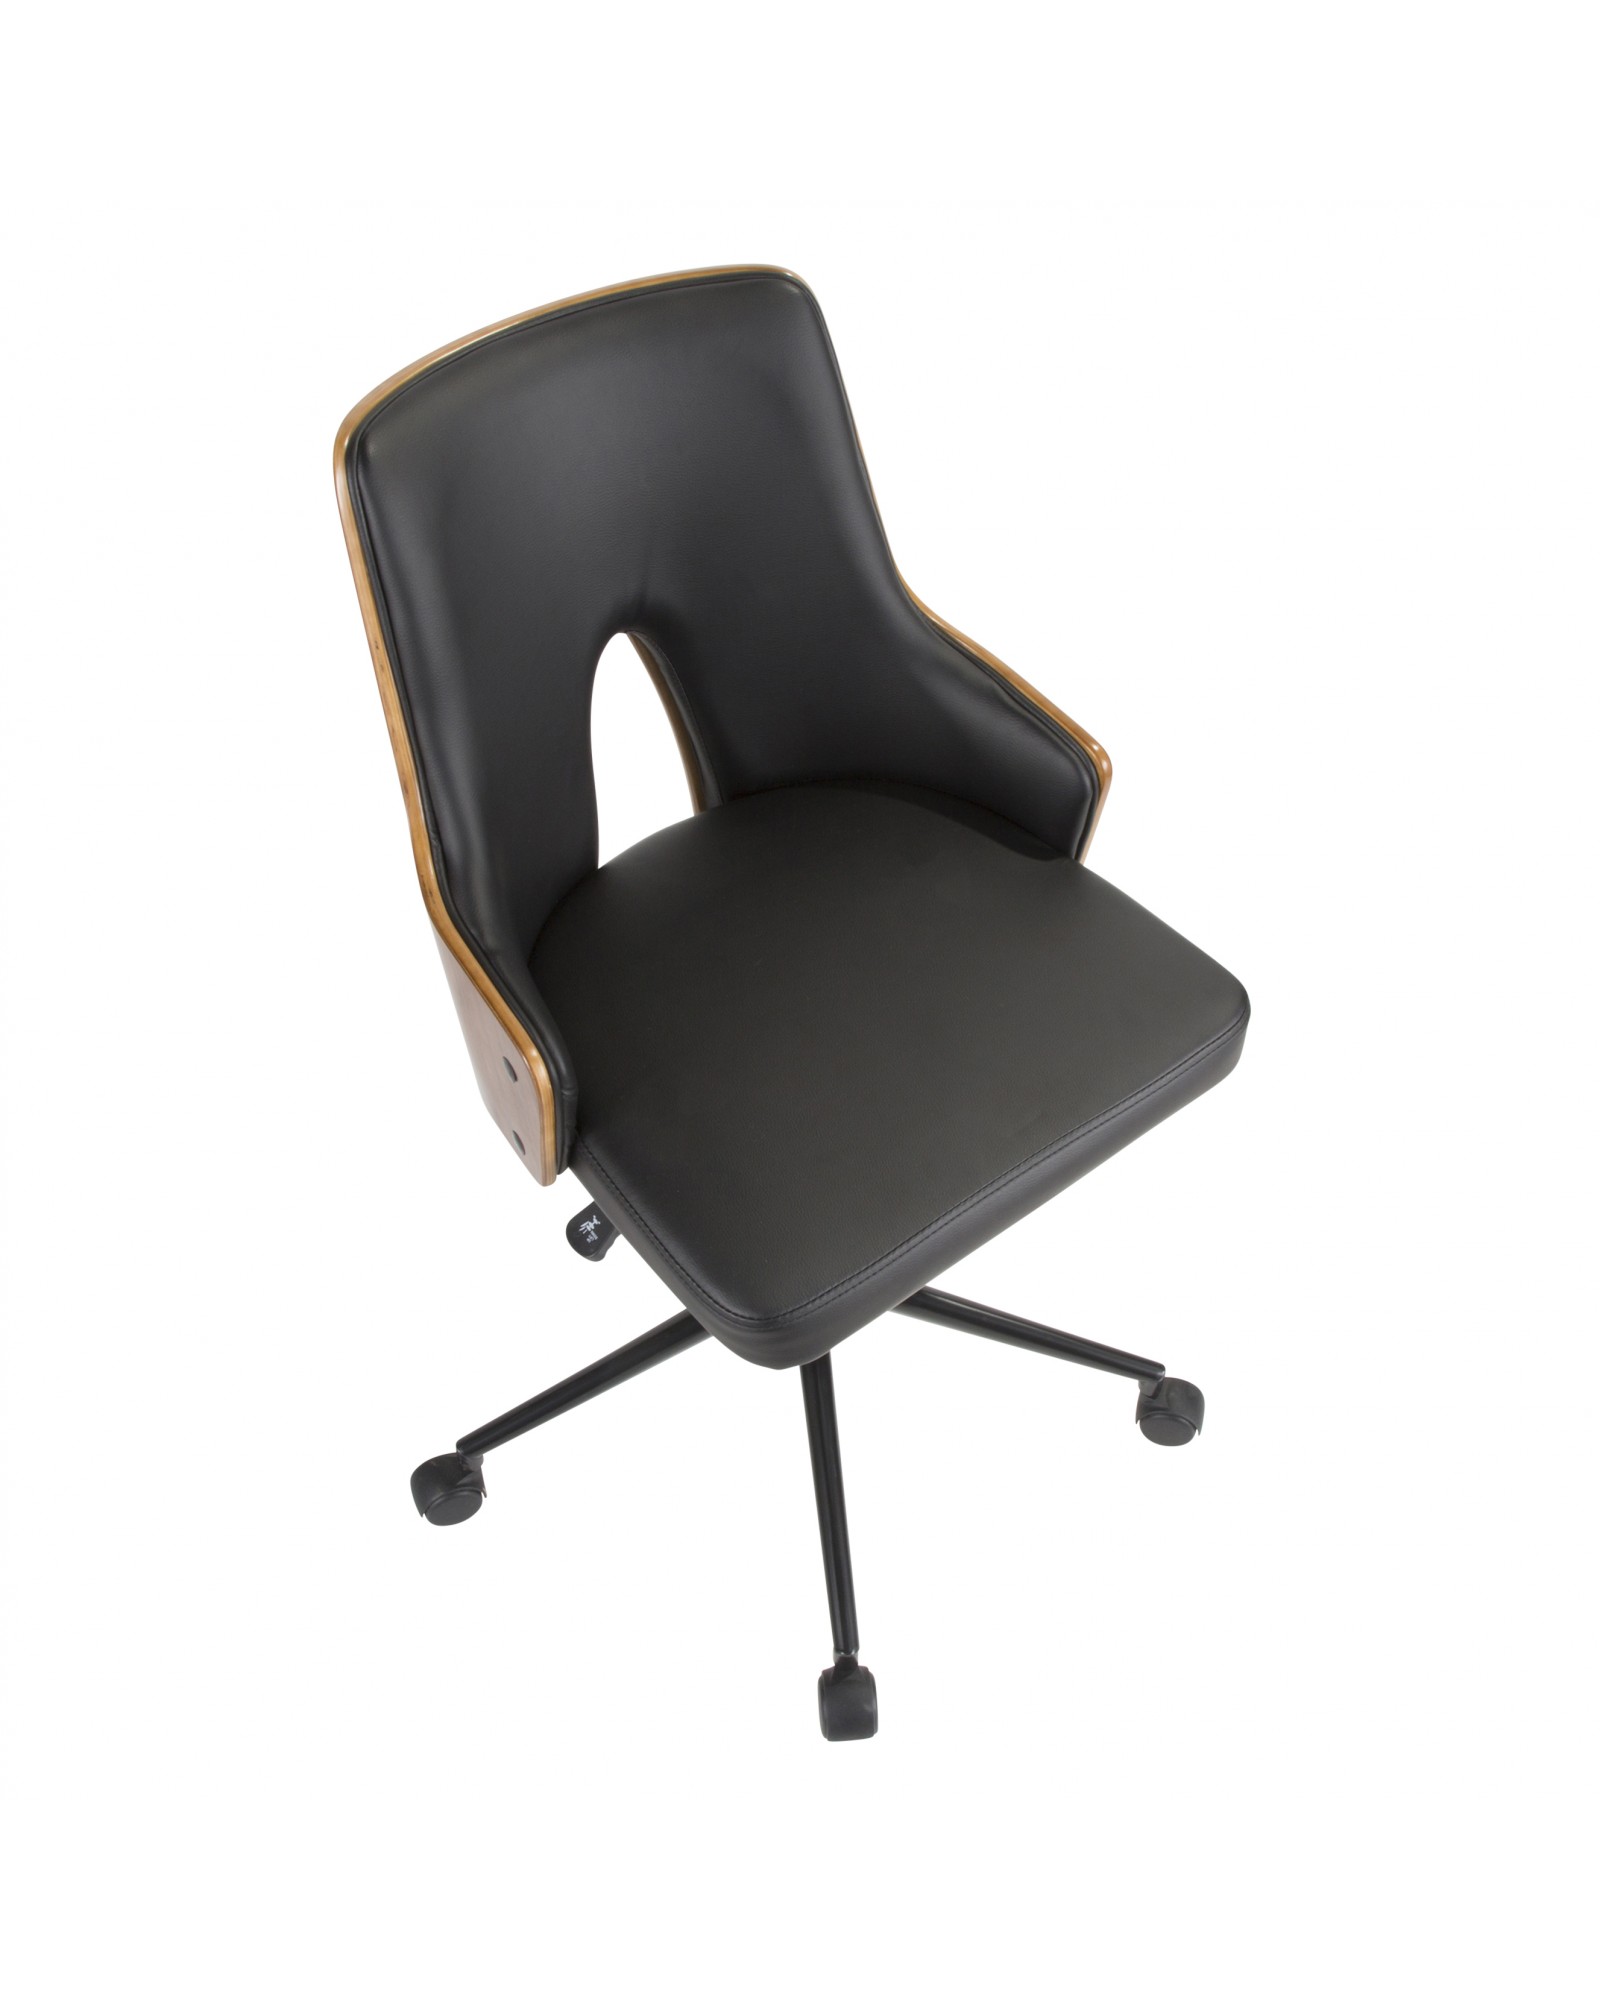 Stella Mid-Century Modern Office Chair in Walnut Wood and Black Faux Leather